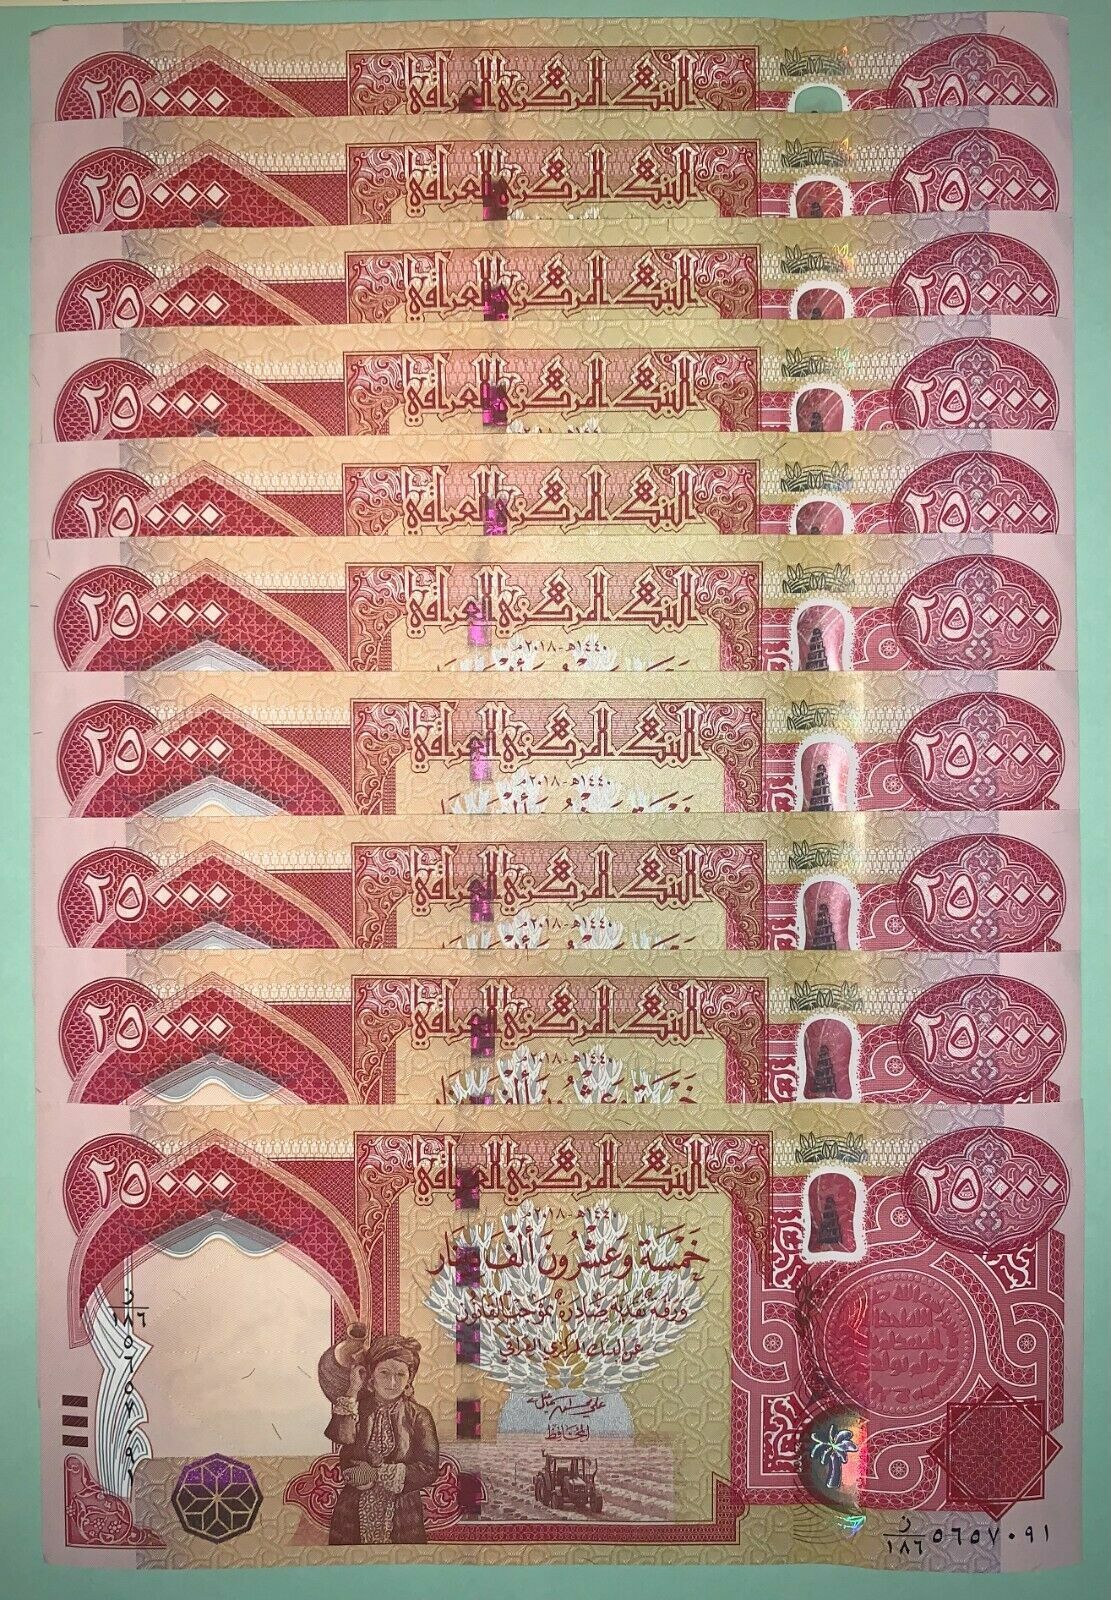 500,000 IQD Iraqi Dinar  Uncirculated UNC FREE NEXT DAY DELIVERY